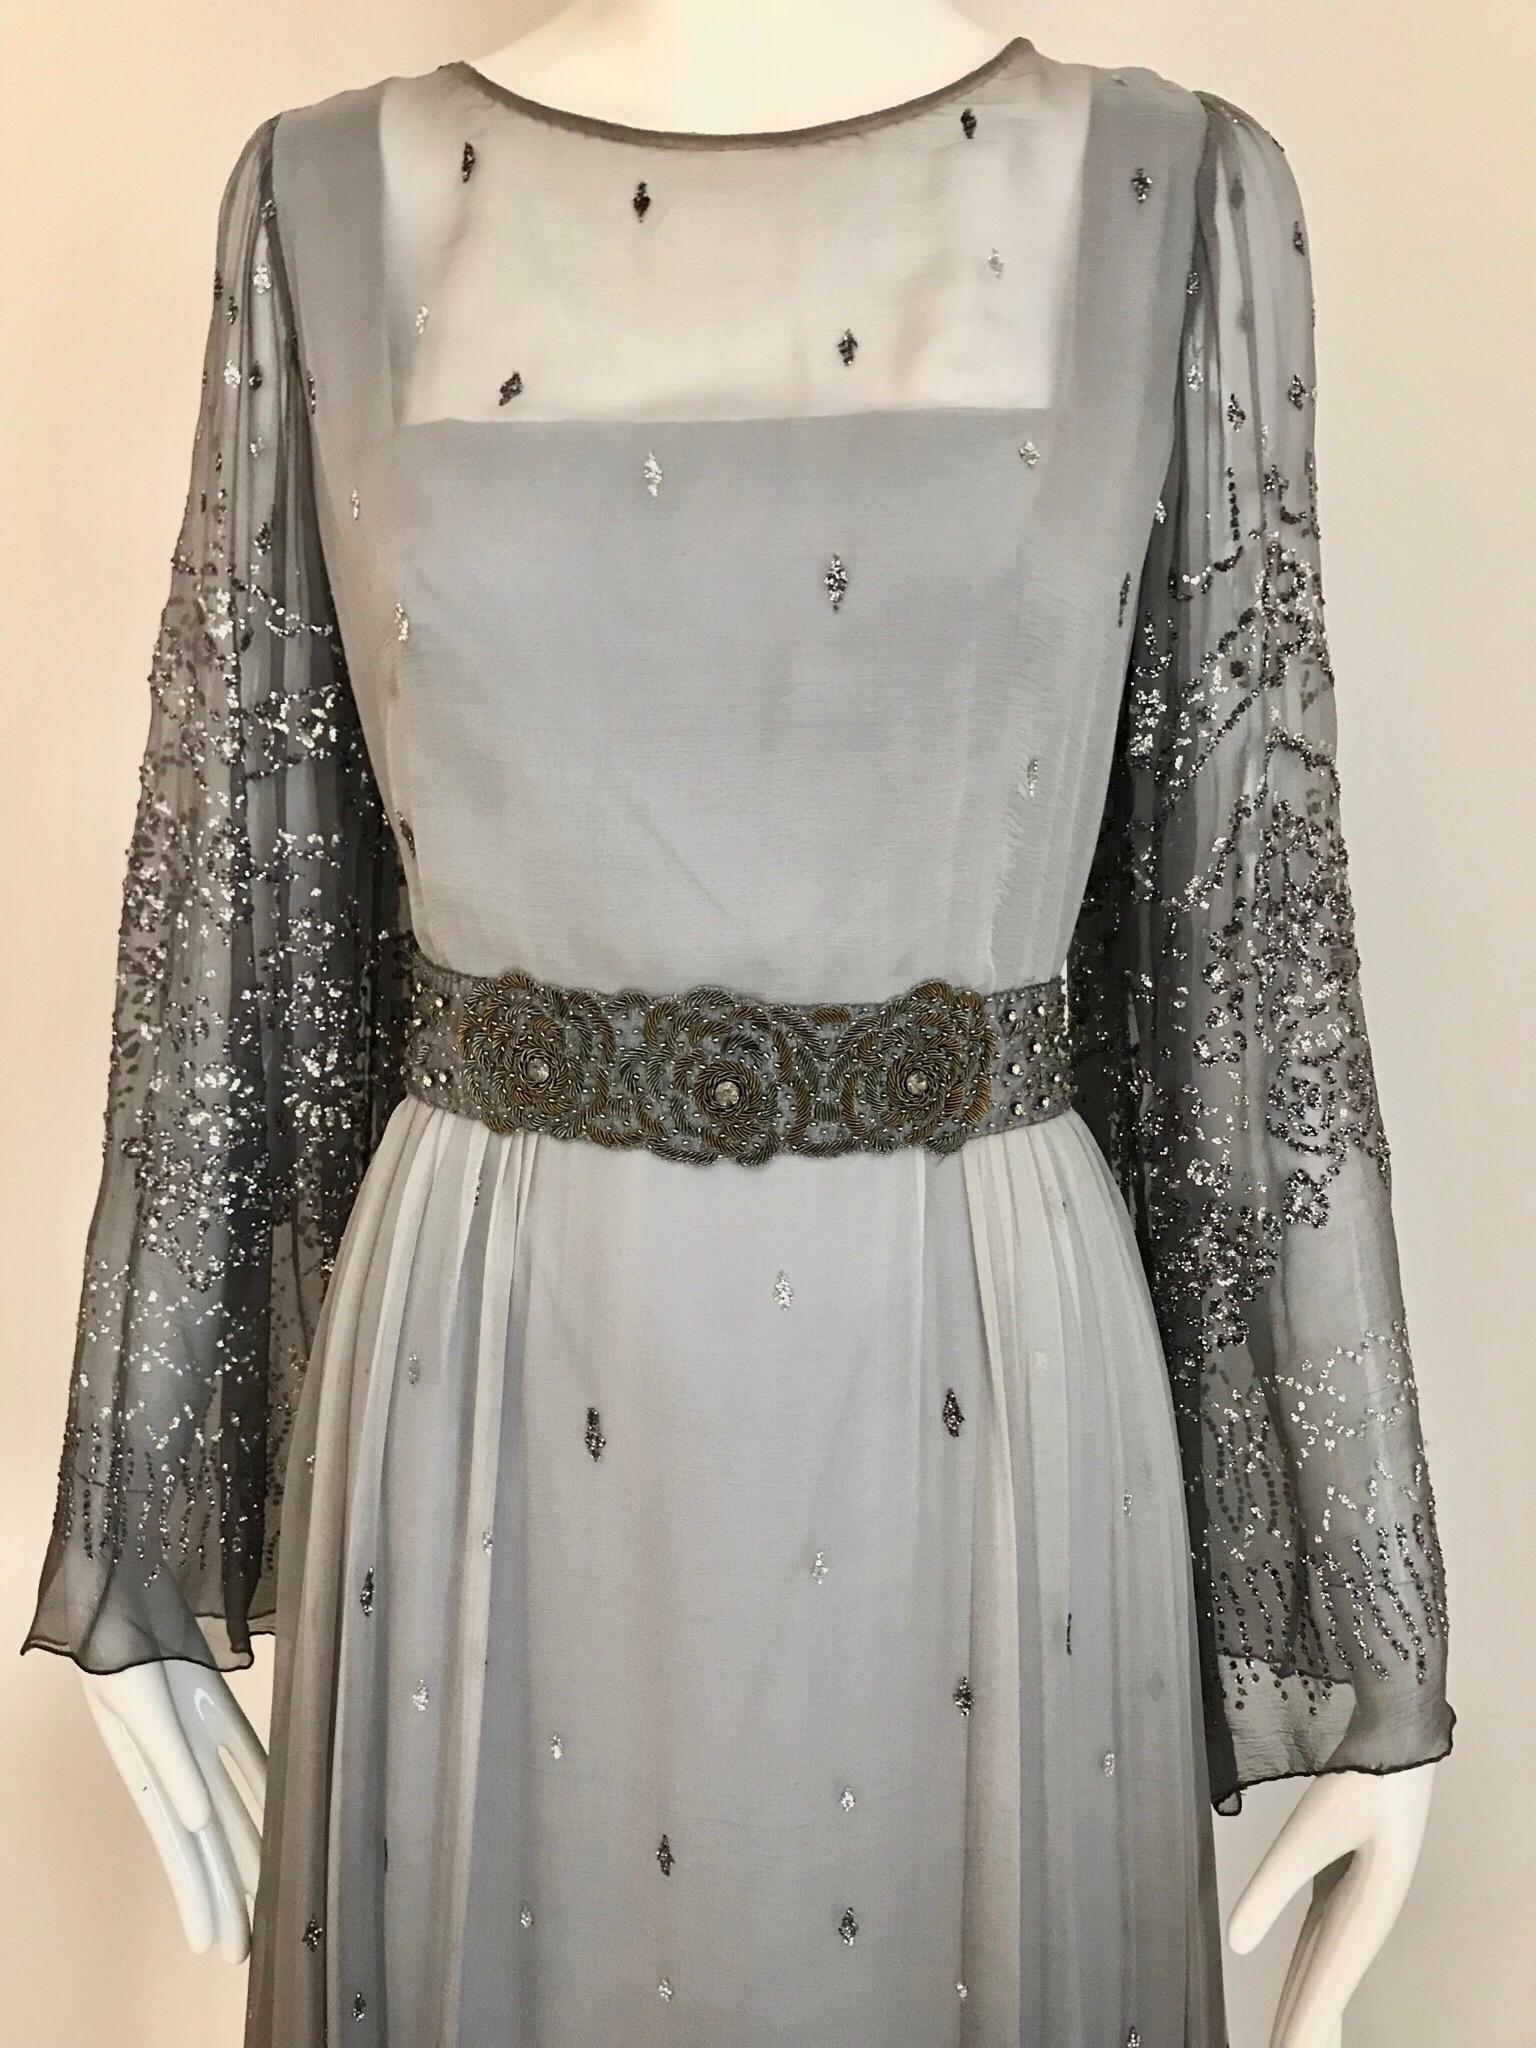 Beautiful 1970s Richilene Grey Silk chiffon Dress with silver sparkles appliques all over bodice and skirt. Romantic and perfect for wedding event or summer evening party. Dress come with grey silk ribbon sash with embroidered beads.
Size: